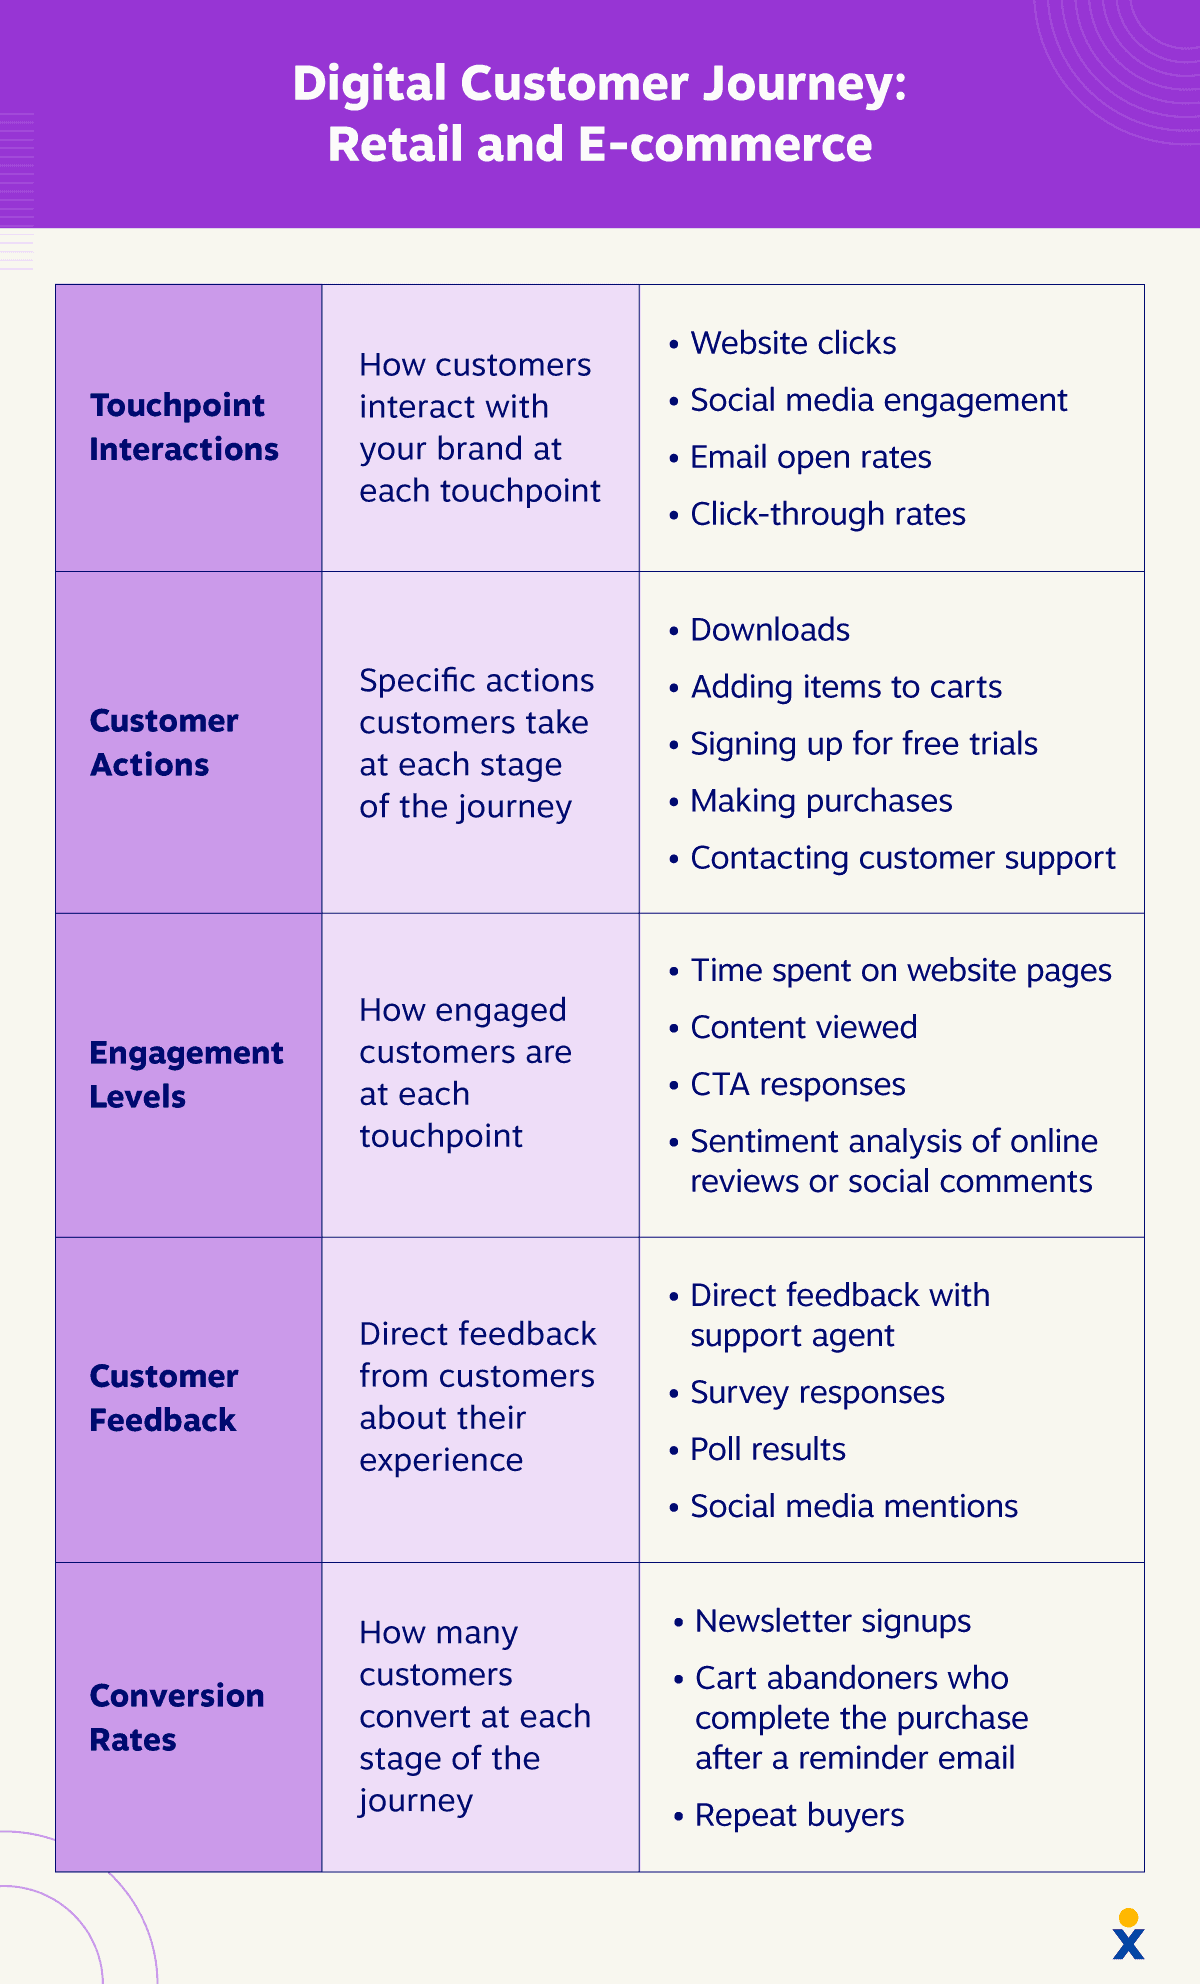 A table showing the types of data that can be collected with digital customer journey mapping